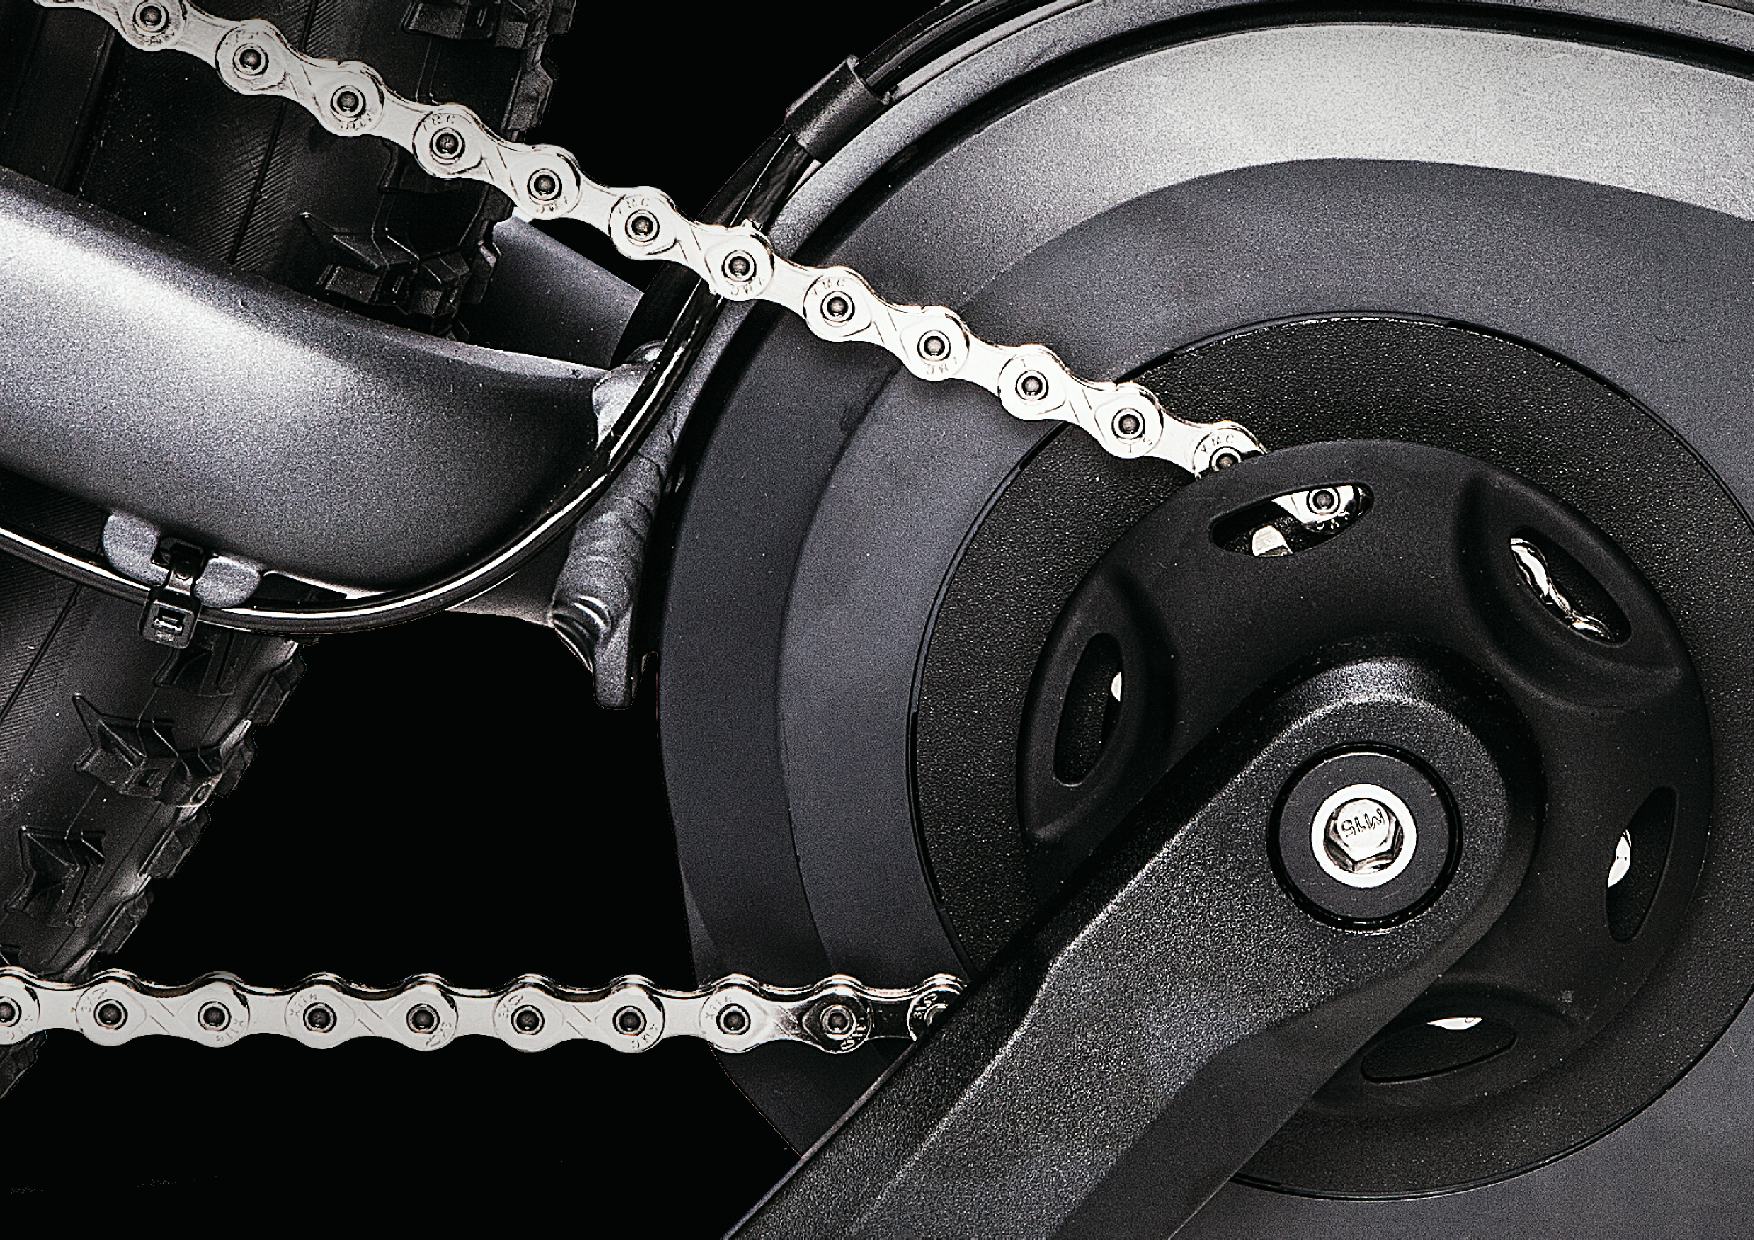 The KMC X-eBike Series chains are recommended for mid-motor systems. – Photo KMC